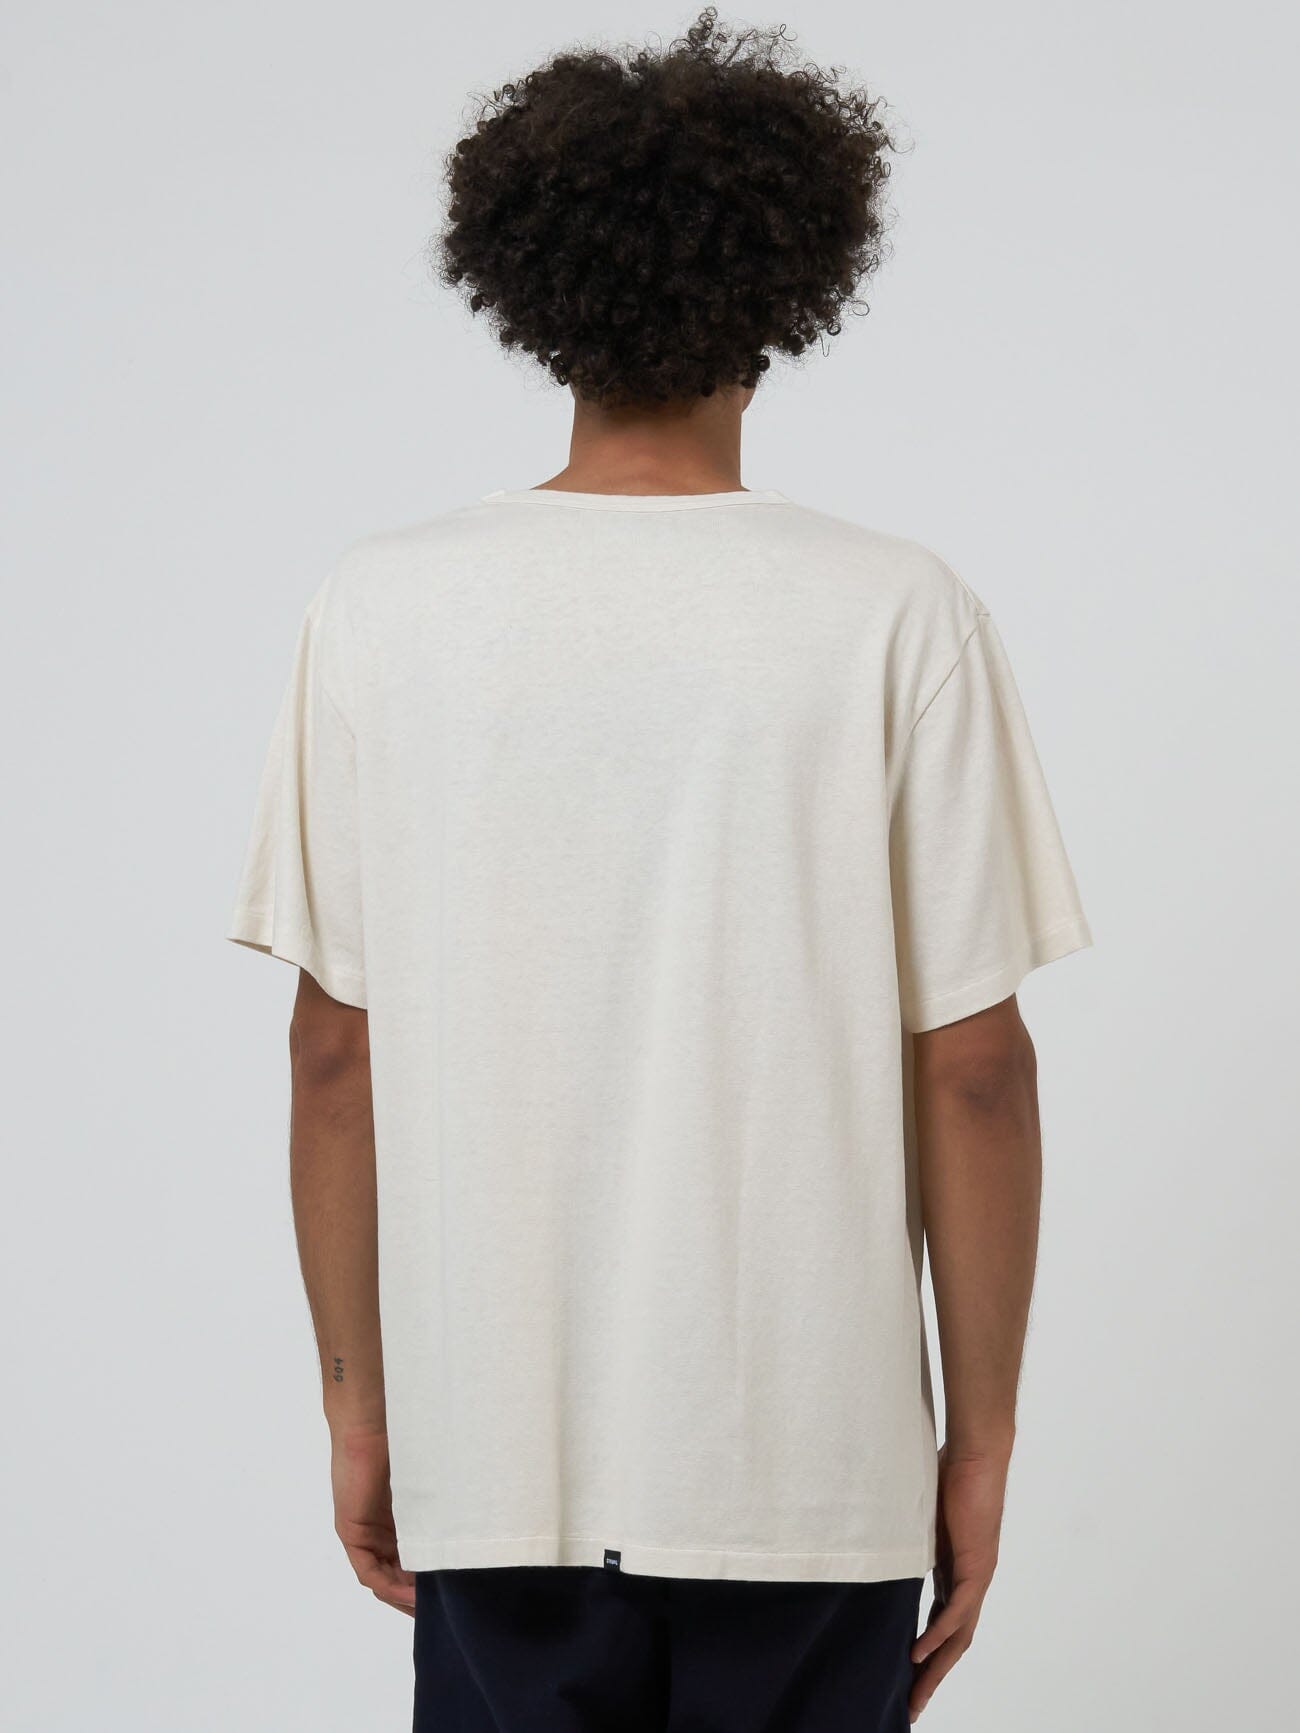 Hemp in Order and Disorder Merch Fit Tee - Heritage White